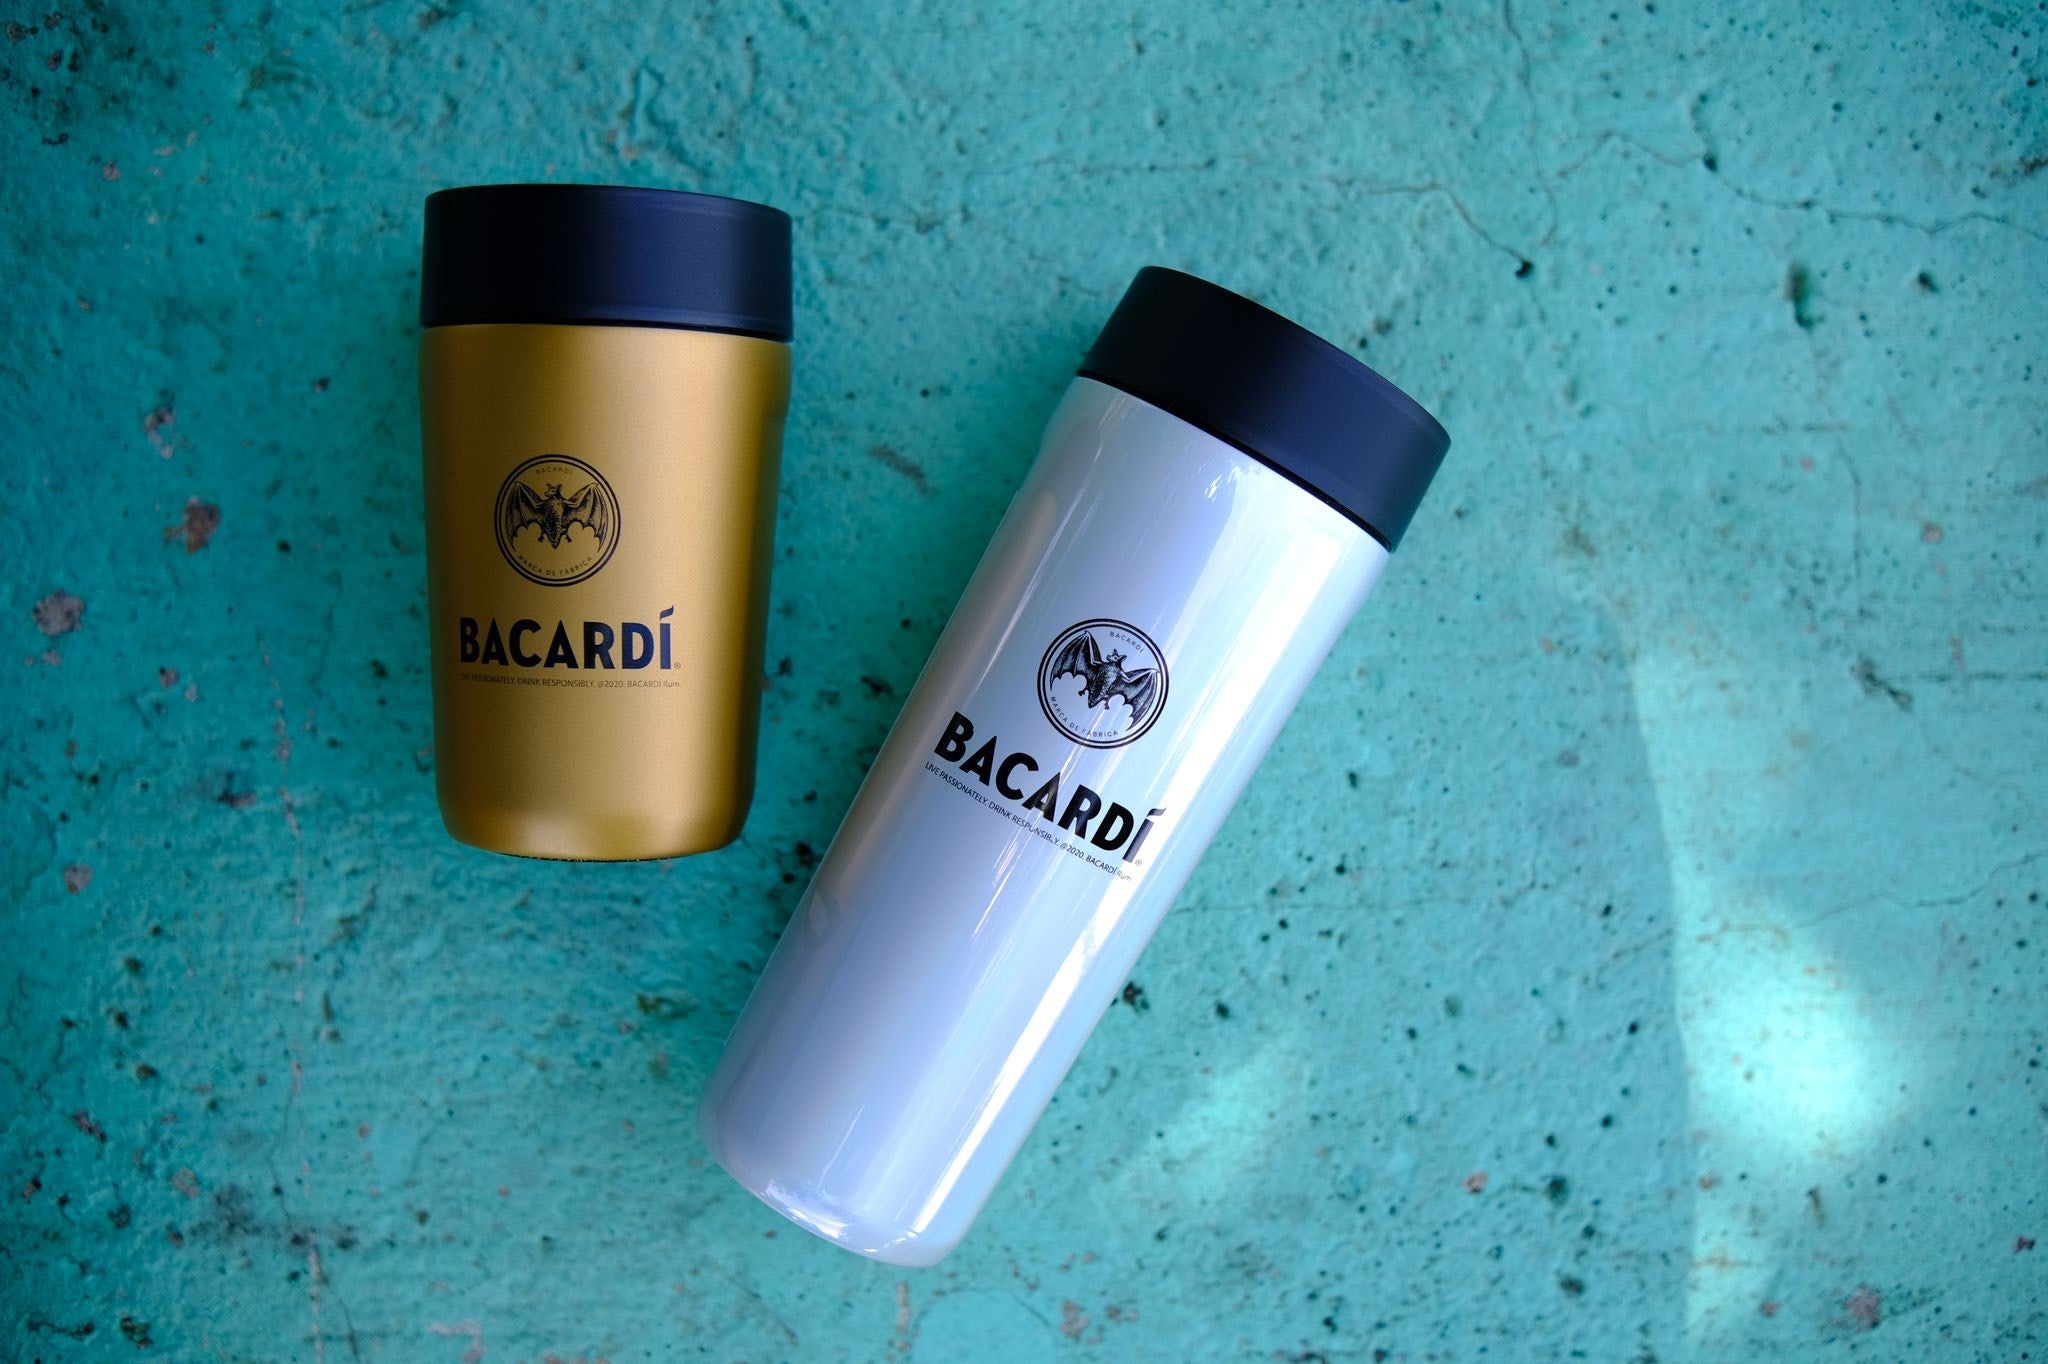 Personalized 17 Oz Ceramic Gold Commuter Cup Insulated Travel Coffee Mug  With Spill-proof 360 Sip Lid by Corkcicle 